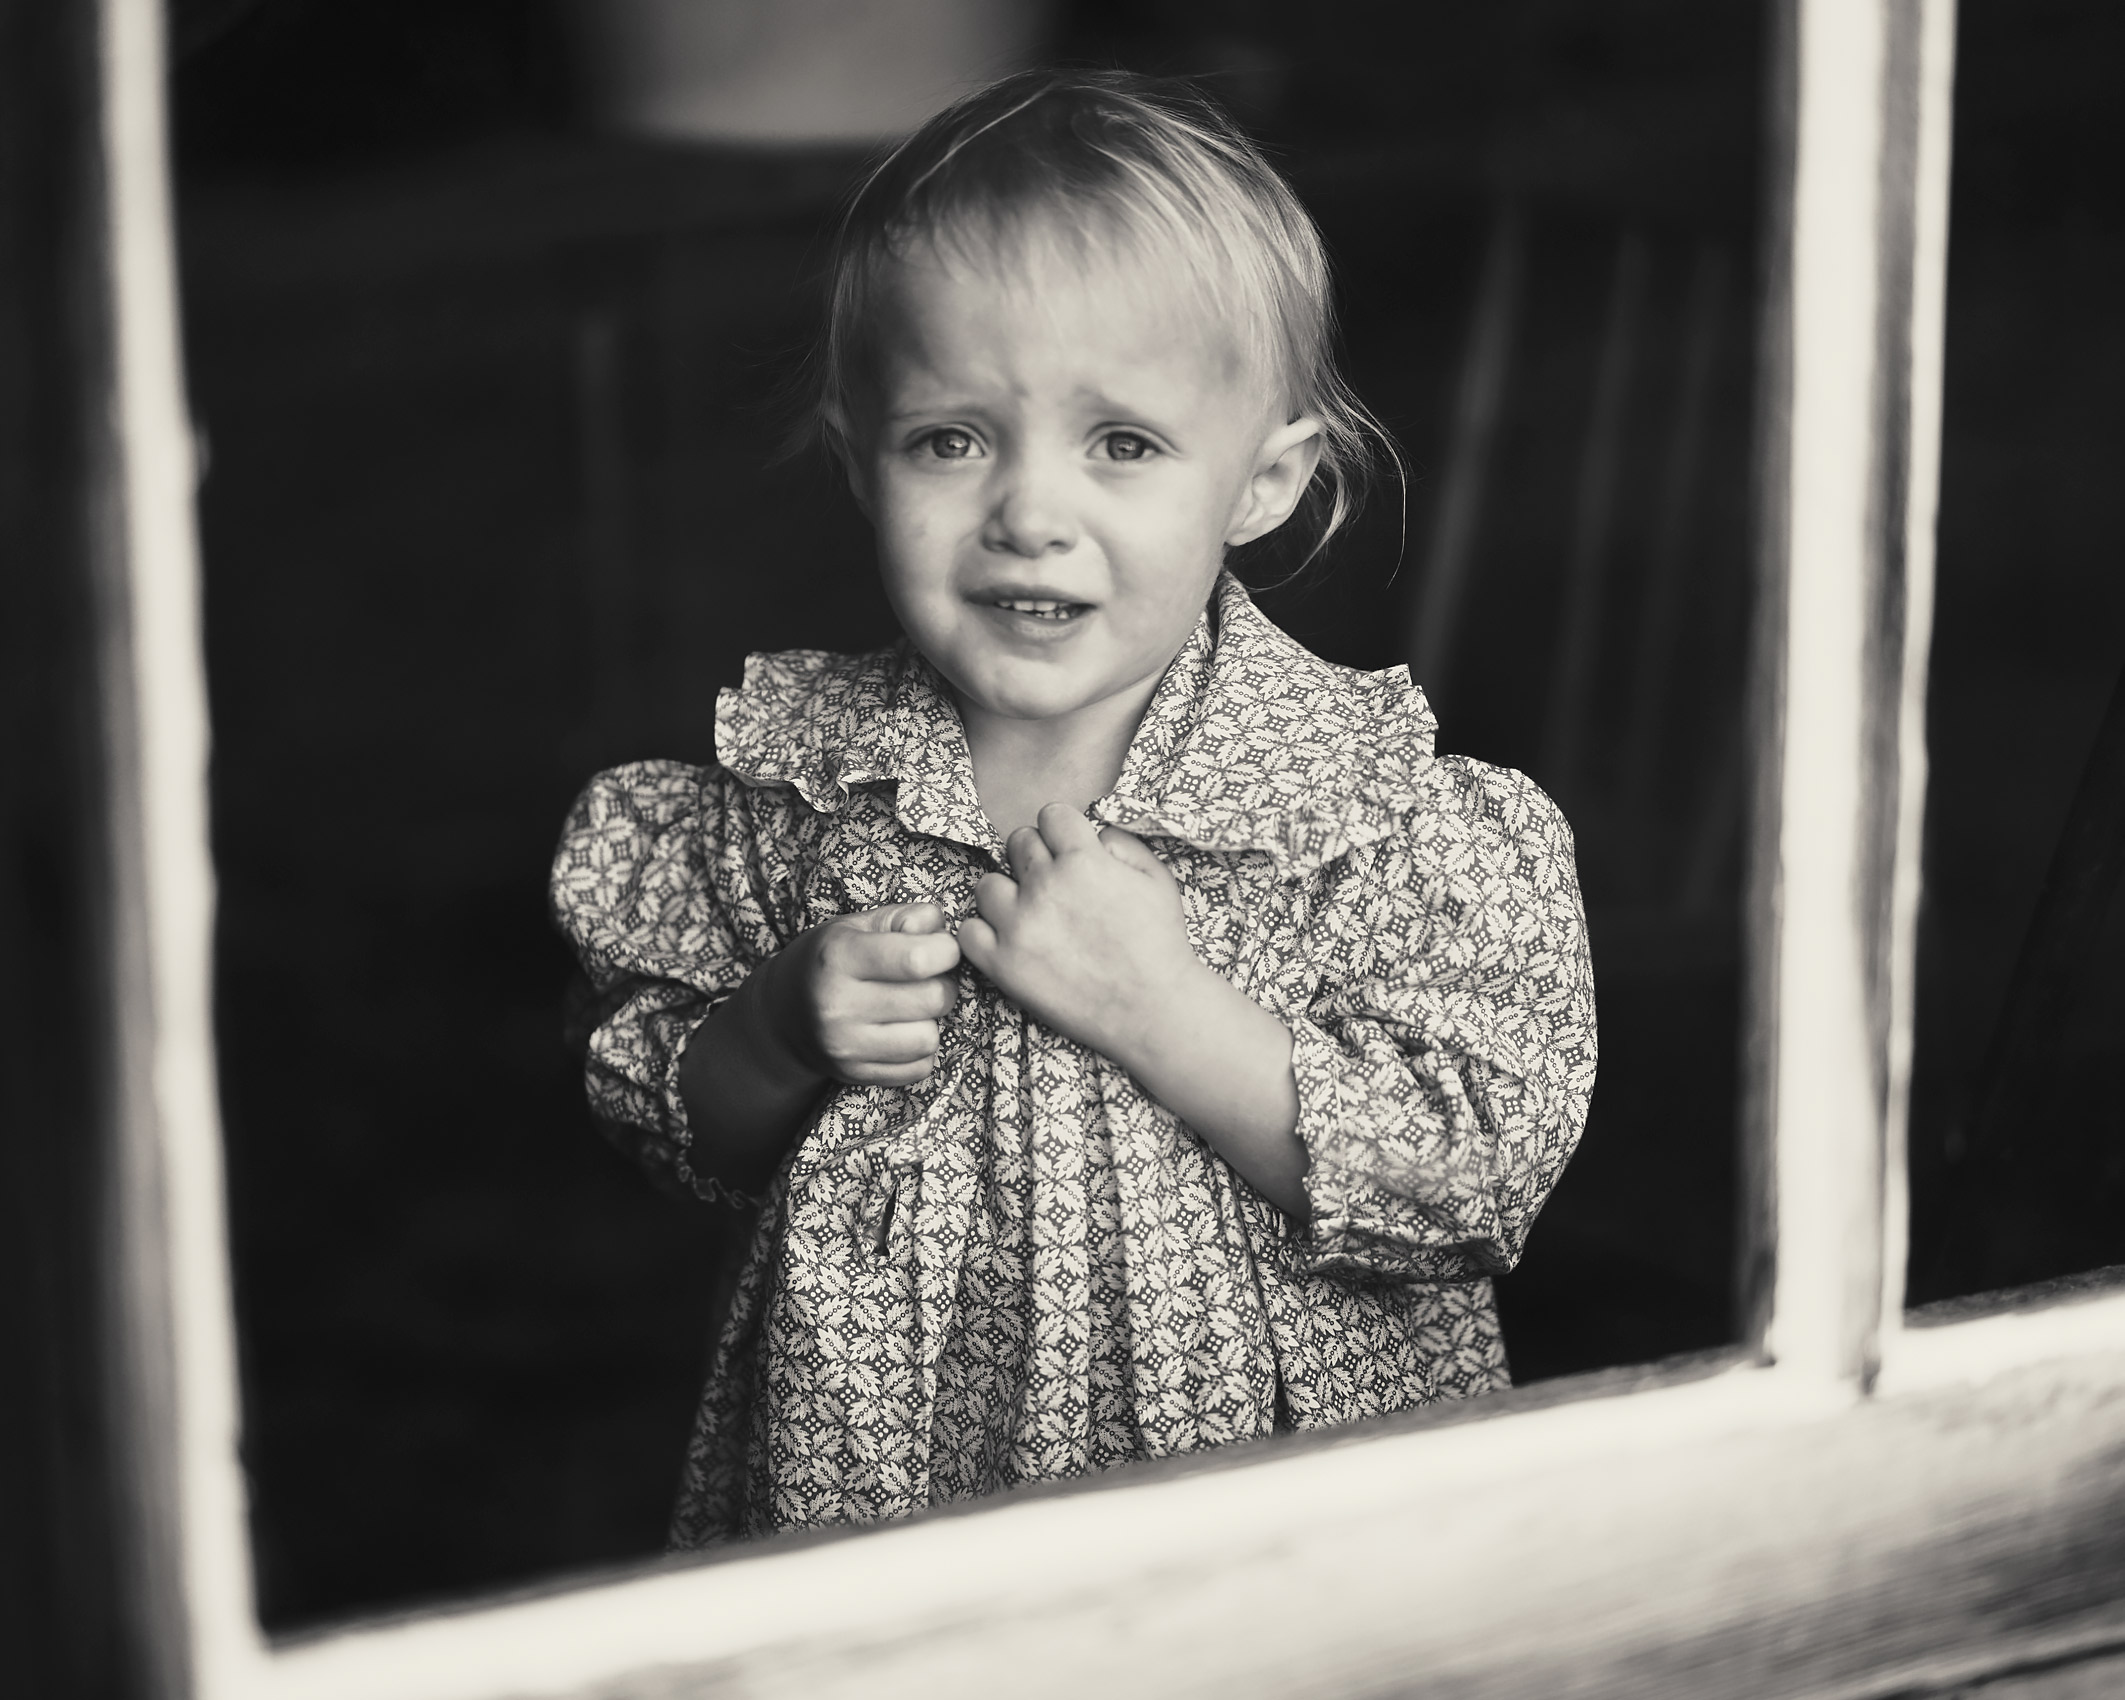 Through a window of a little girl with tears